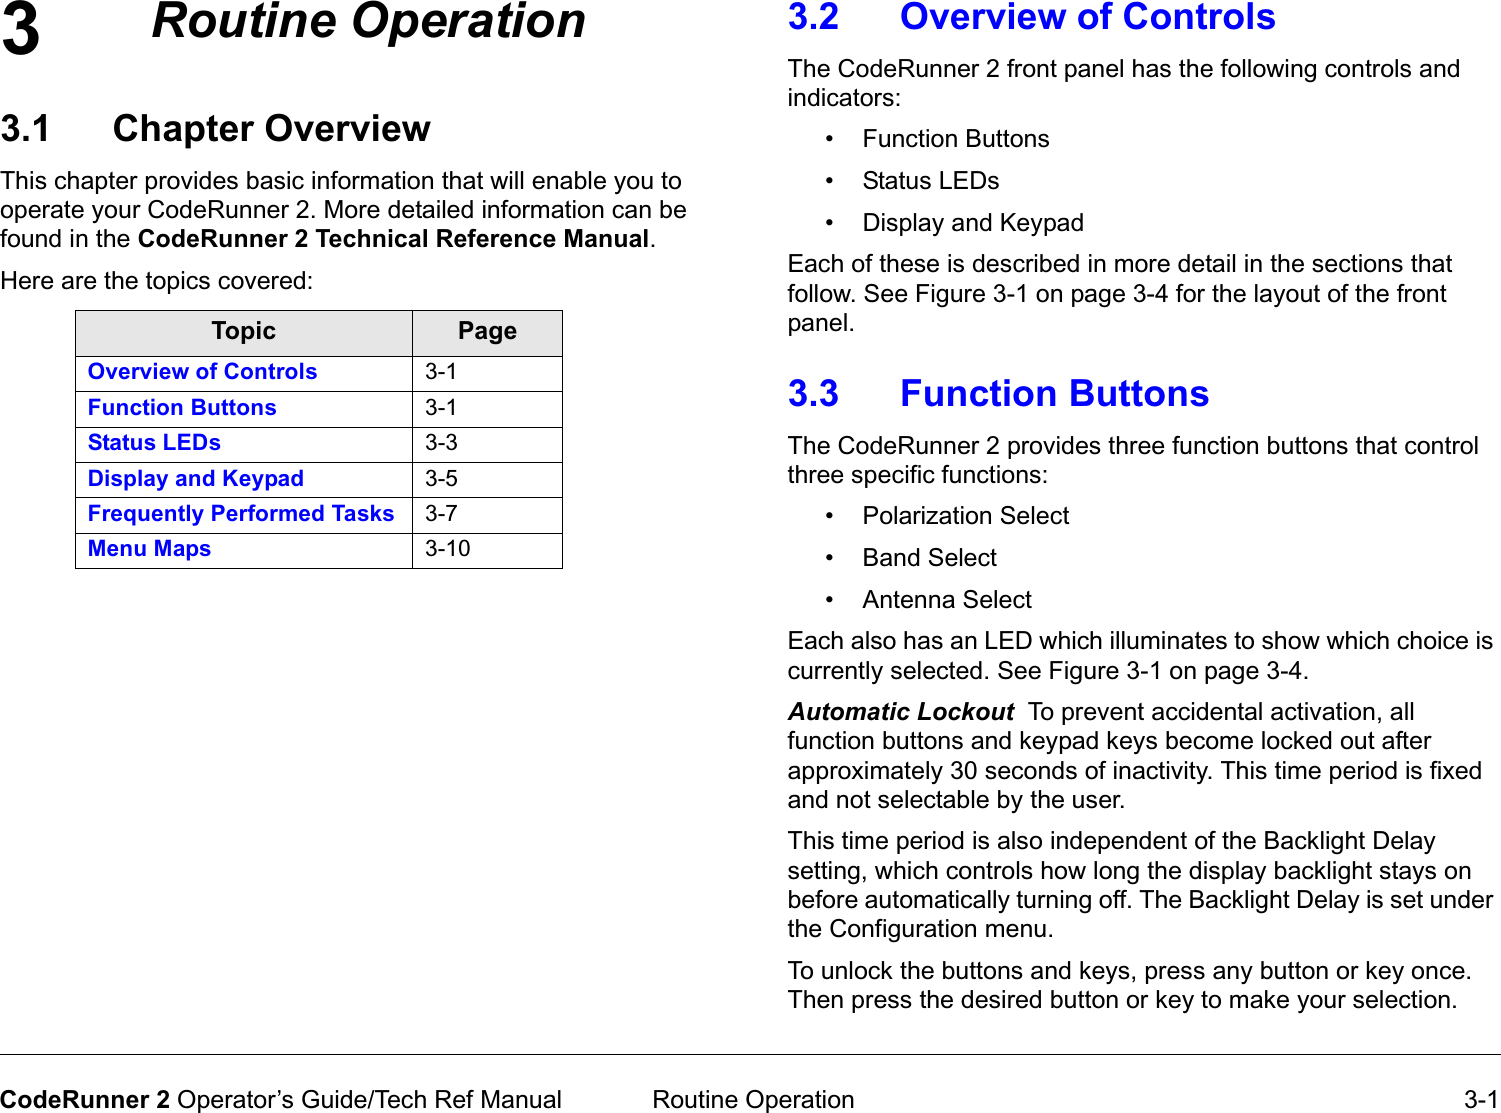 3 Routine Operation 3-1CodeRunner 2 Operator’s Guide/Tech Ref ManualRoutineOperation3.1 Chapter OverviewThis chapter provides basic information that will enable you to operate your CodeRunner 2. More detailed information can be found in the CodeRunner 2 Technical Reference Manual. Here are the topics covered:Topic PageOverview of Controls 3-1Function Buttons 3-1Status LEDs 3-3Display and Keypad 3-5Frequently Performed Tasks 3-7Menu Maps 3-103.2 Overview of Controls The CodeRunner 2 front panel has the following controls and indicators:• Function Buttons•Status LEDs• Display and KeypadEach of these is described in more detail in the sections that follow. See Figure 3-1 on page 3-4 for the layout of the front panel. 3.3 Function ButtonsThe CodeRunner 2 provides three function buttons that control three specific functions: • Polarization Select• Band Select• Antenna SelectEach also has an LED which illuminates to show which choice is currently selected. See Figure 3-1 on page 3-4.AutomaticLockoutTo prevent accidental activation, all function buttons and keypad keys become locked out after approximately 30 seconds of inactivity. This time period is fixed and not selectable by the user.This time period is also independent of the Backlight Delay setting, which controls how long the display backlight stays on before automatically turning off. The Backlight Delay is set under the Configuration menu.To unlock the buttons and keys, press any button or key once. Then press the desired button or key to make your selection.